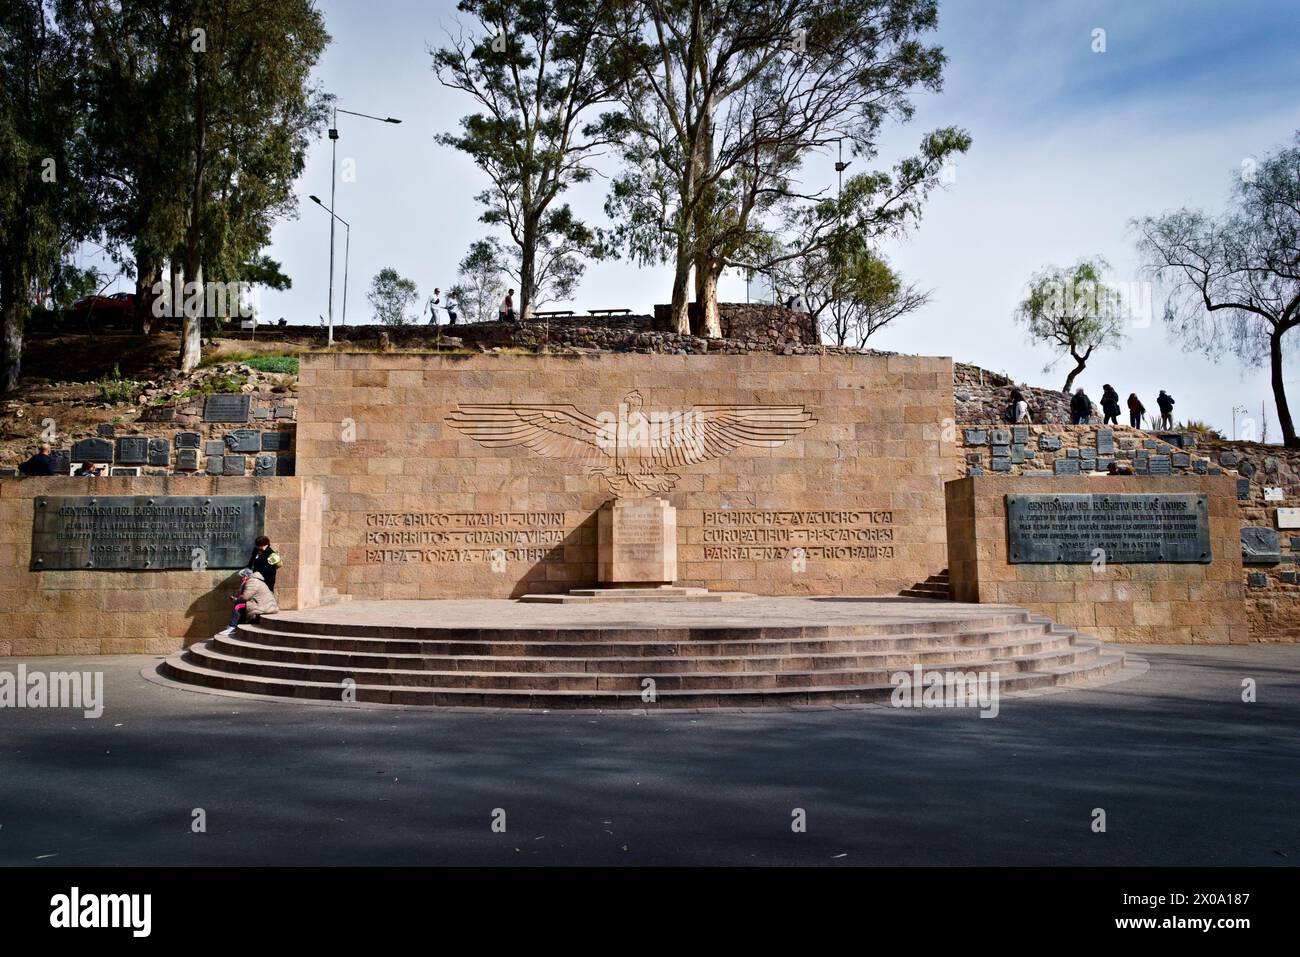 Monument of the Cerro de la Gloria, in Mendoza, Argentina, naming the battles of the Independence War. Stock Photo